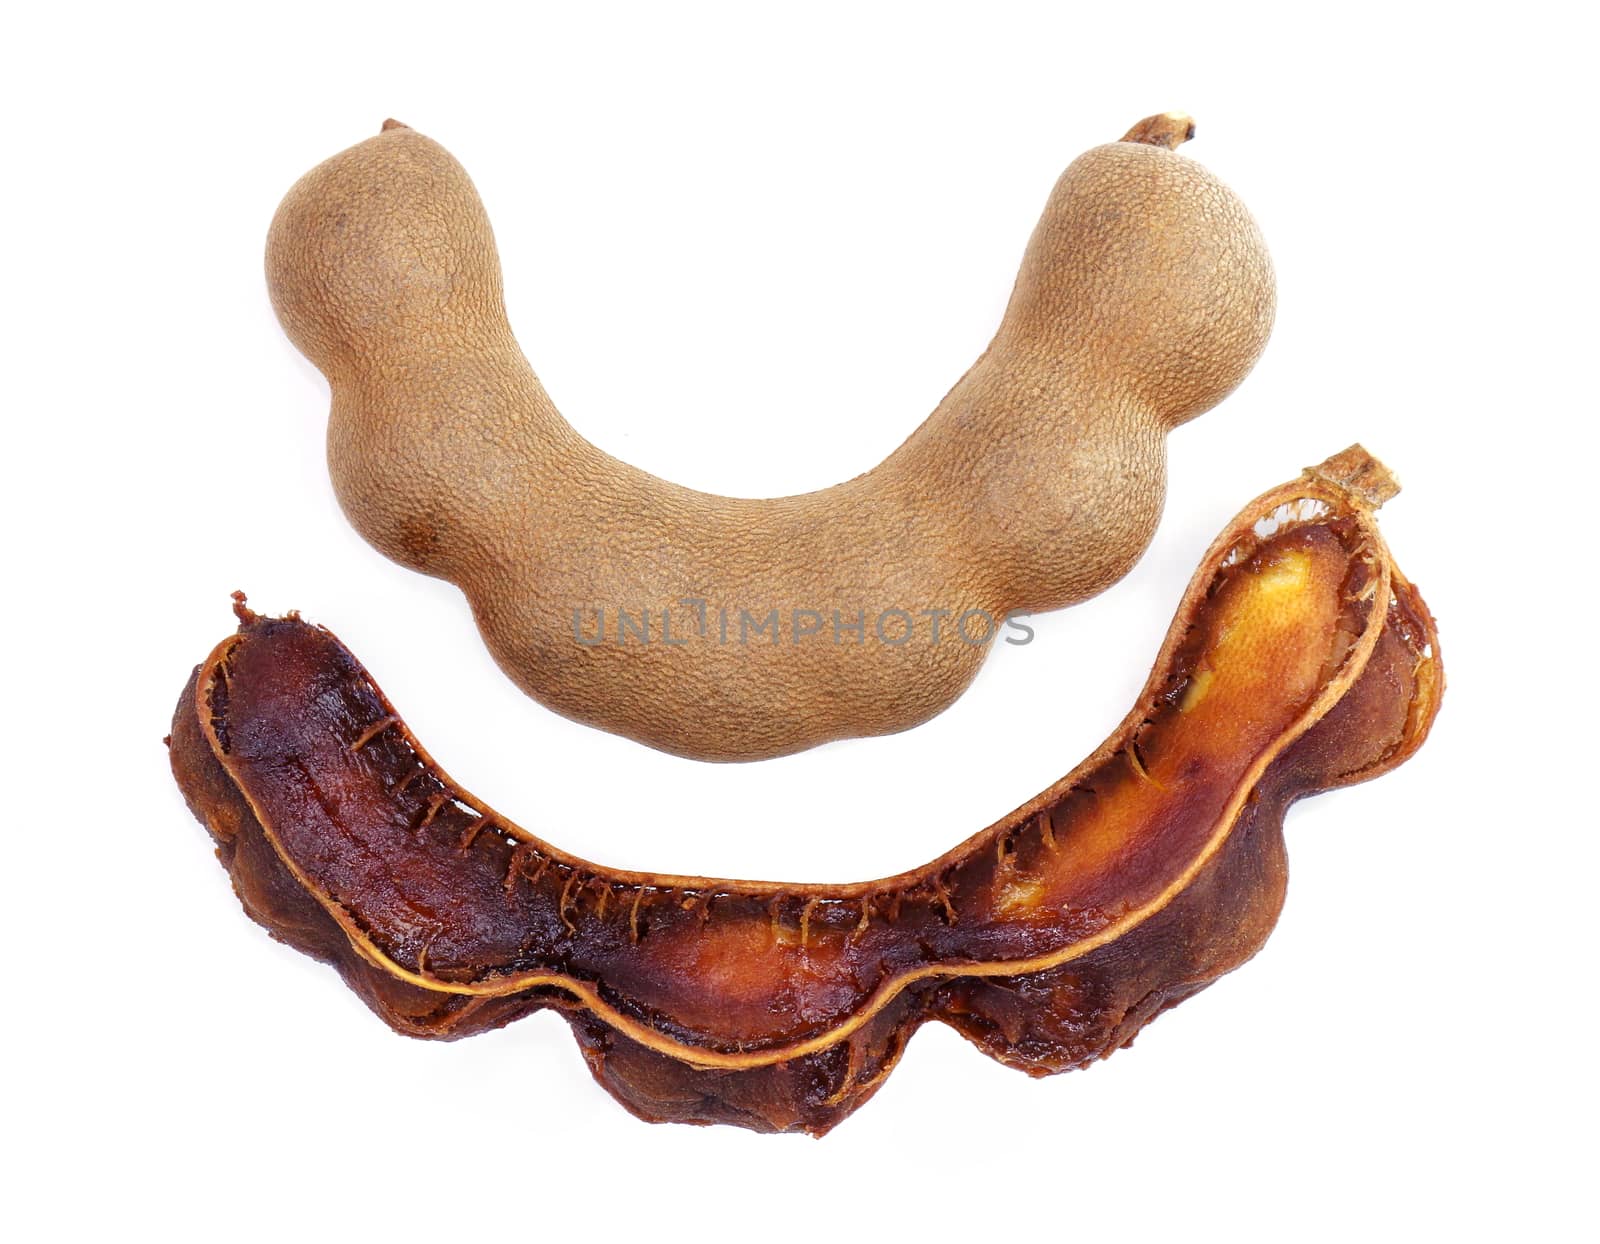 tamarind, sweet tamarind, brown tamarind, tamarind heap peel isolated on white background by cgdeaw